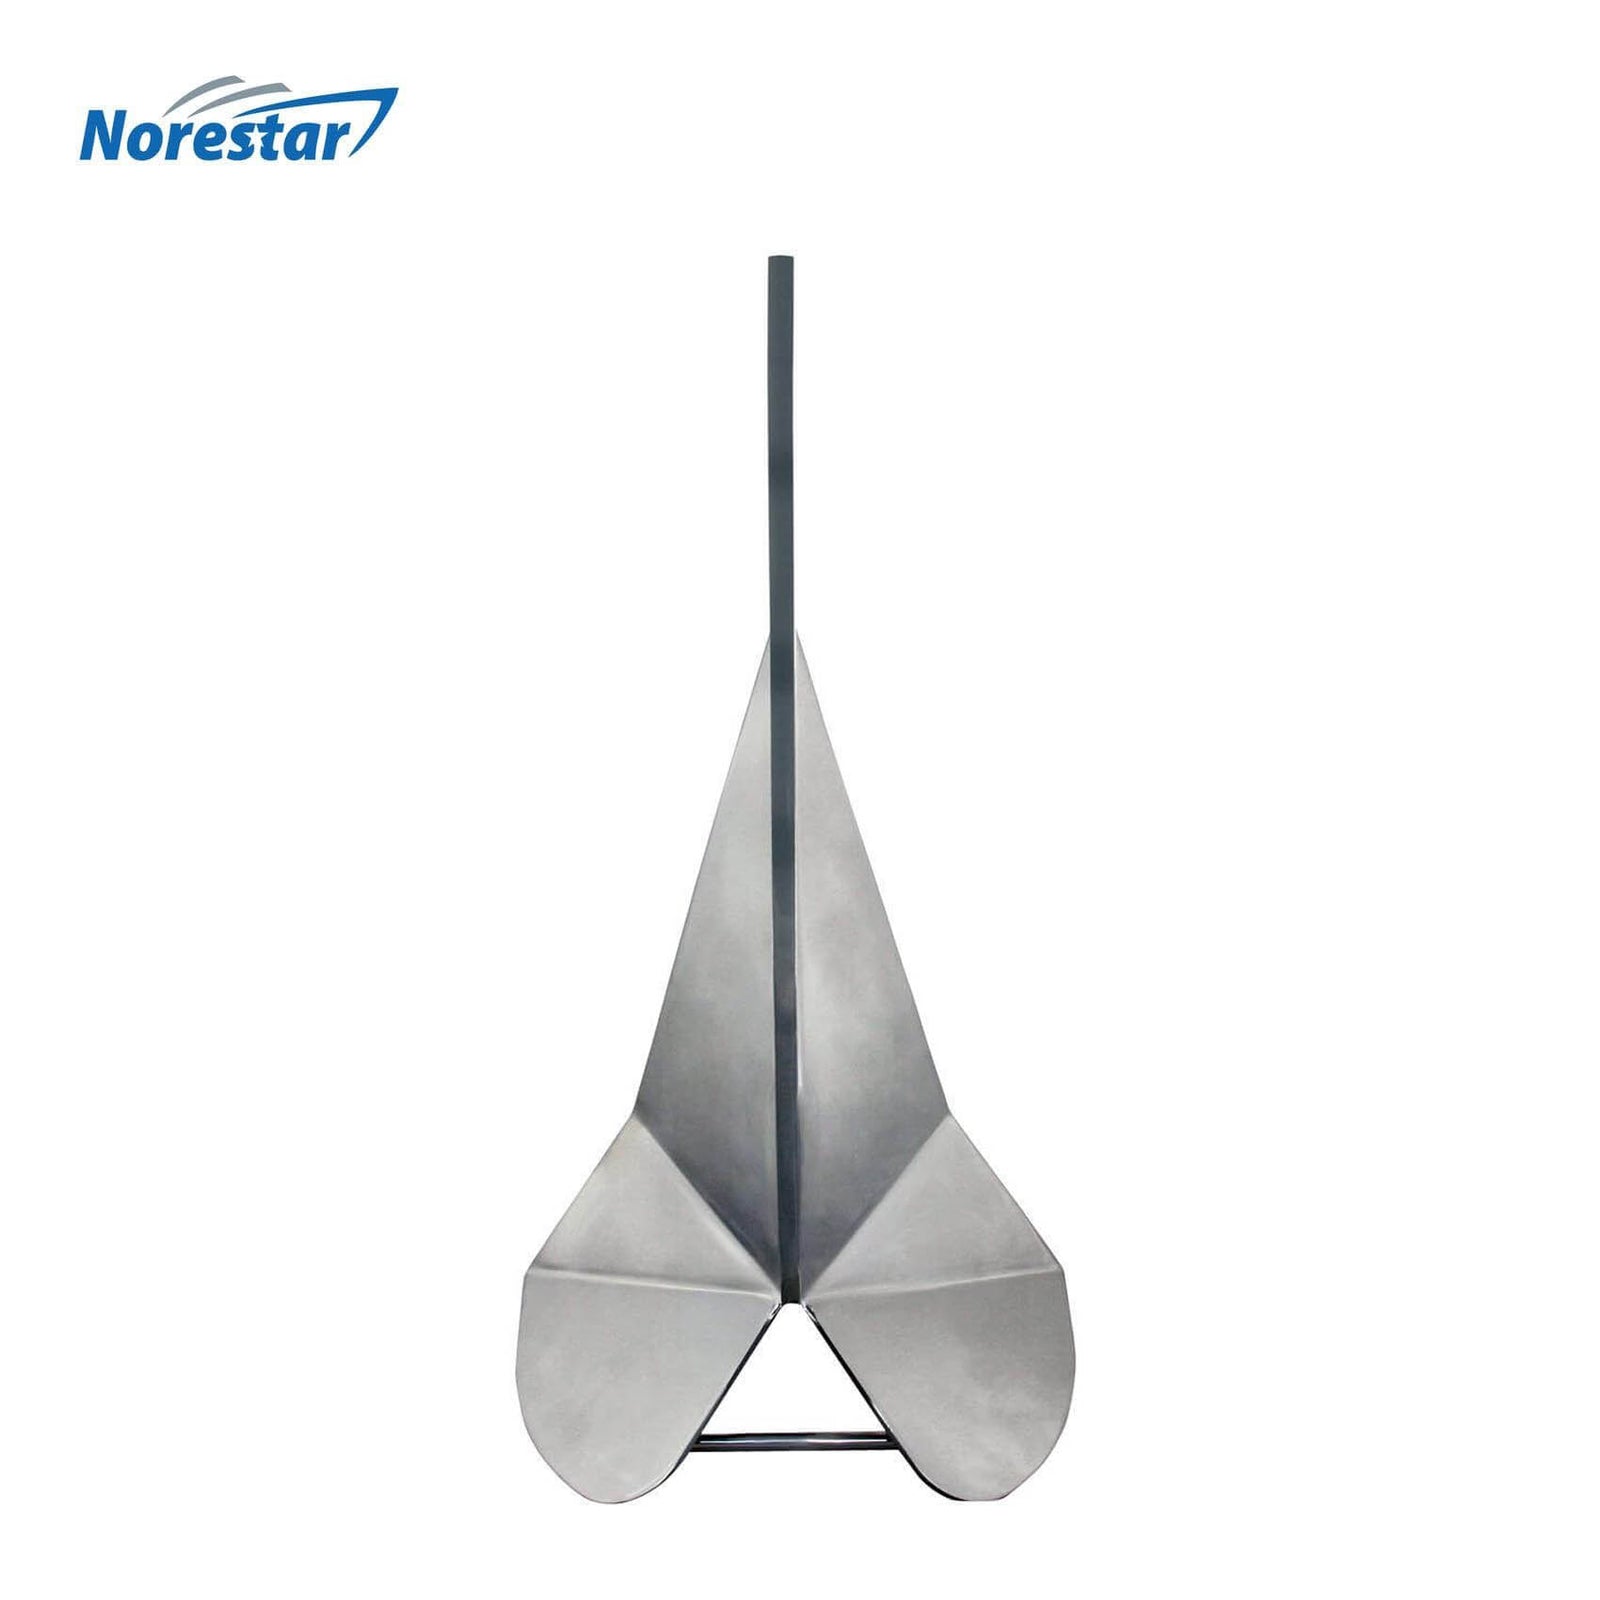 Stainless Steel Wing/Delta Boat Anchor by Norestar - Top